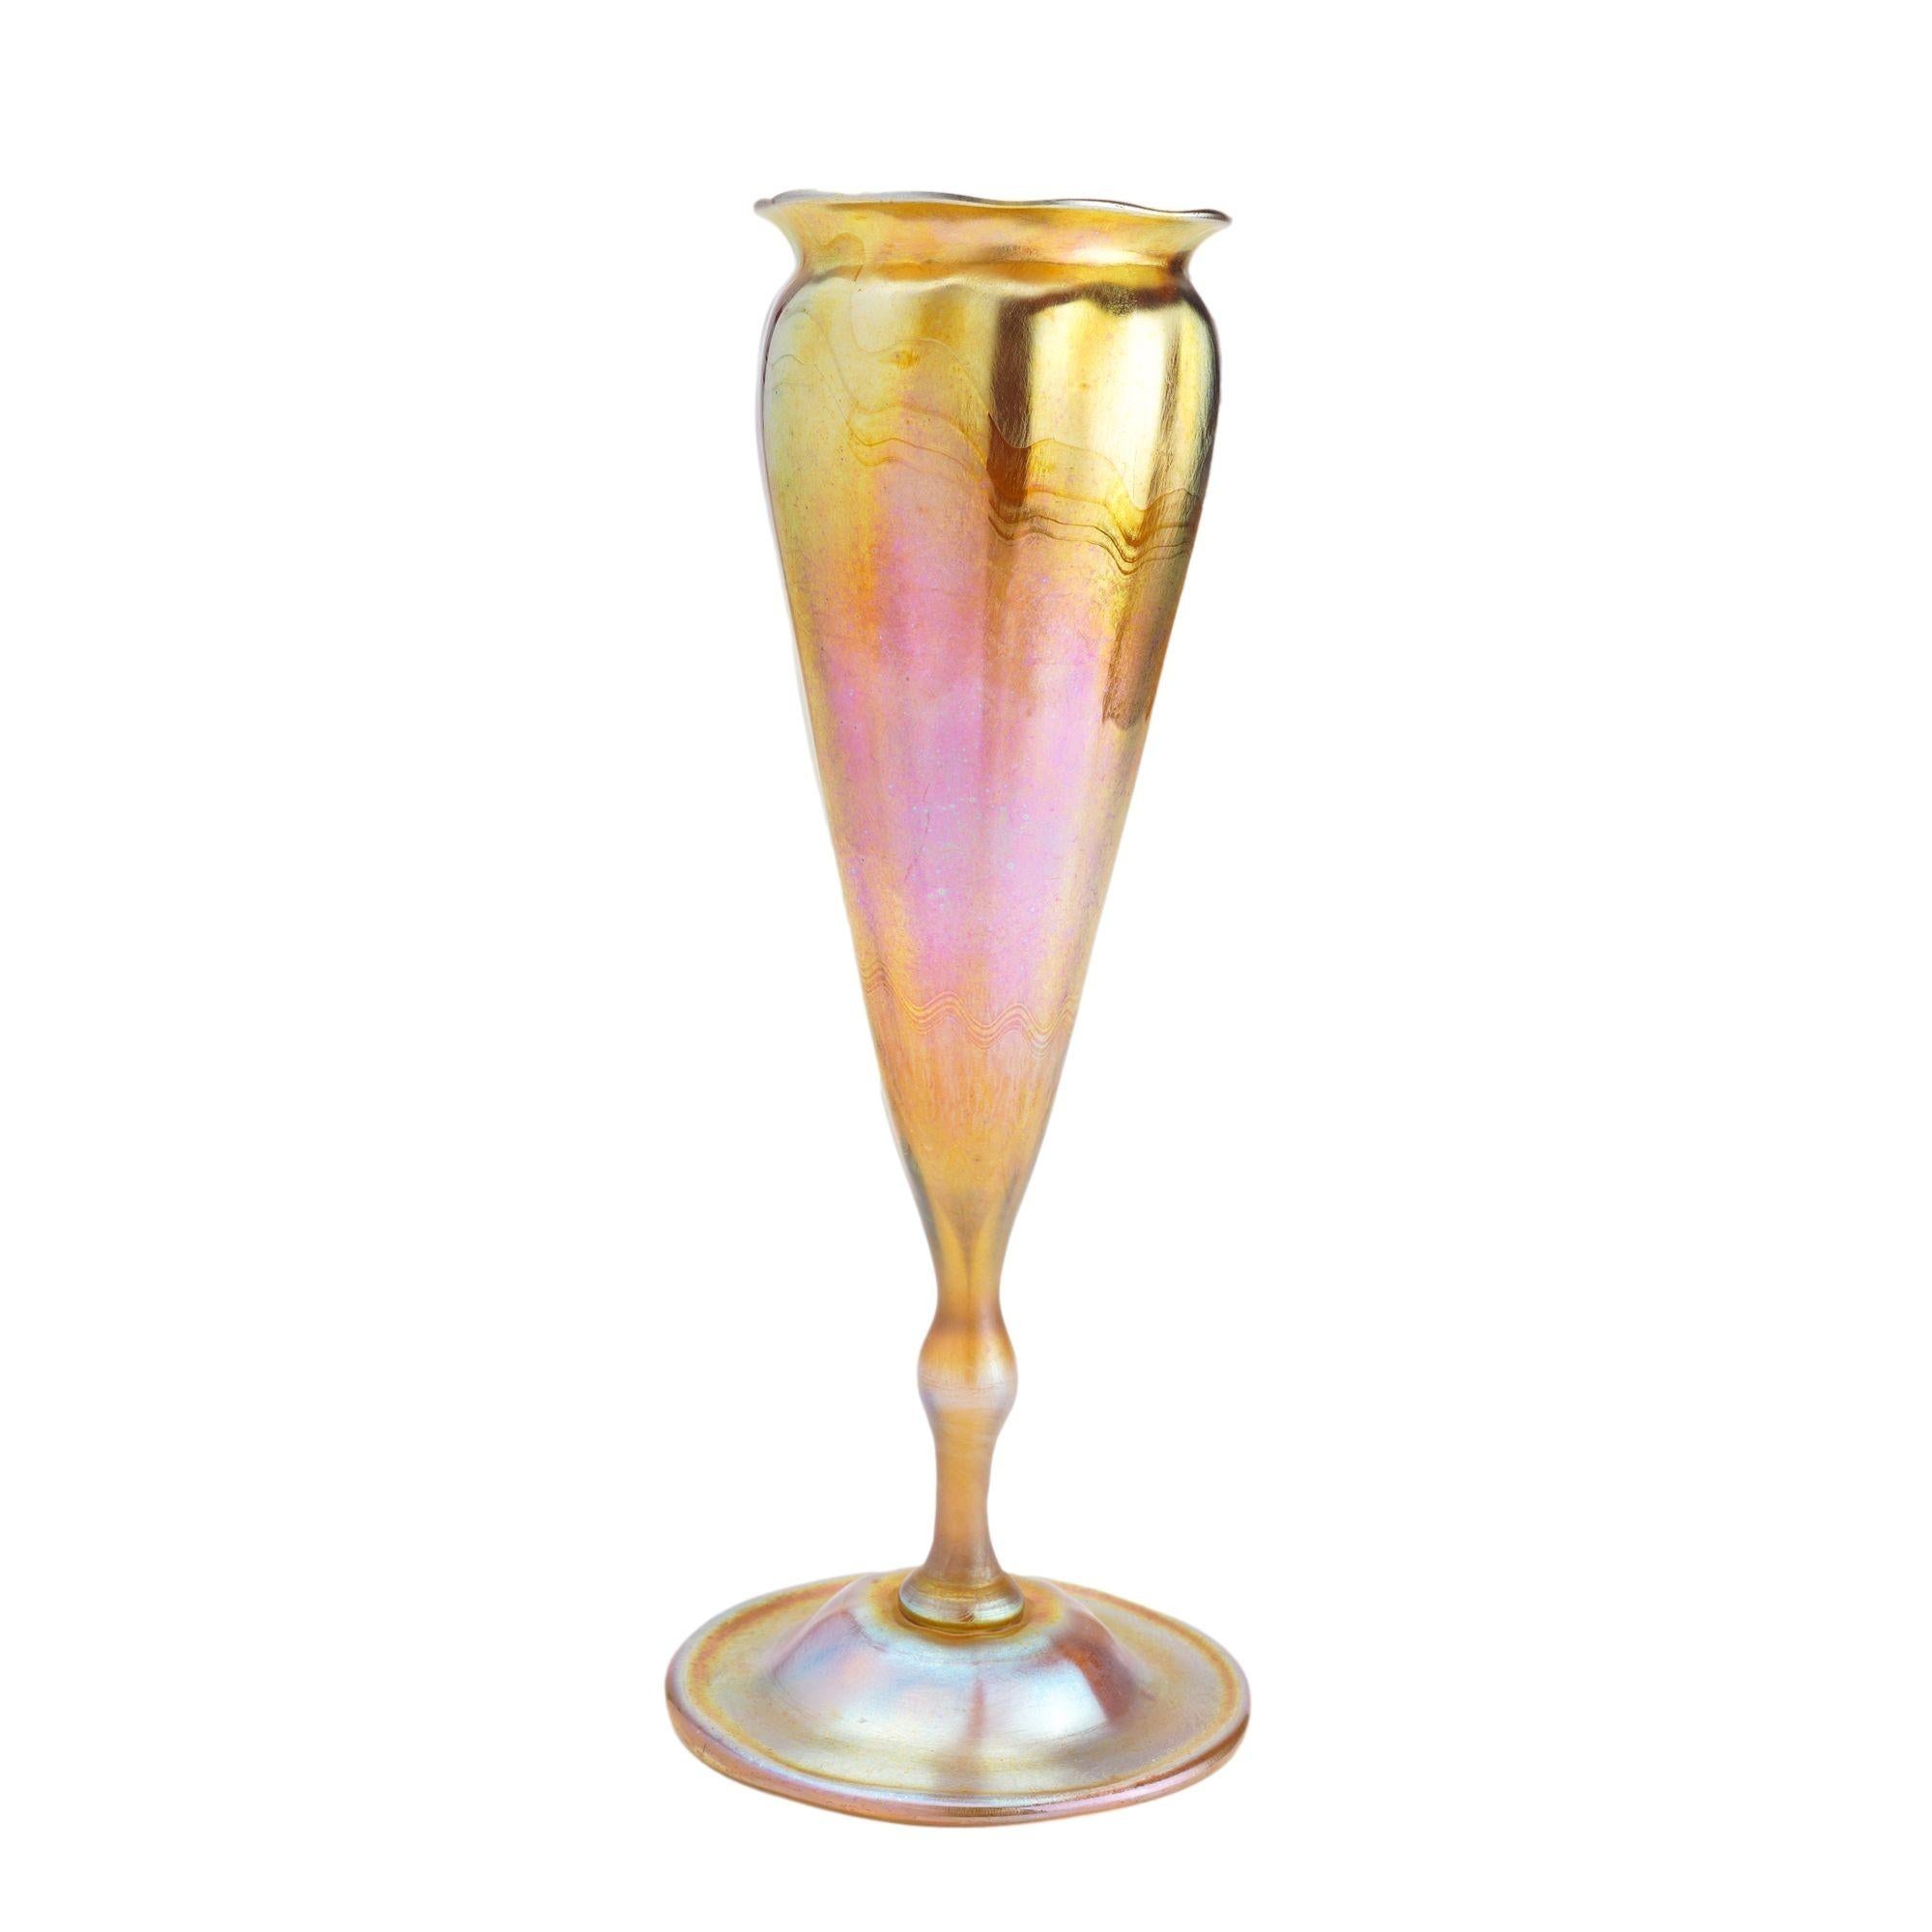 Tiffany Studio ribbed flora form iridescent gold Favrile blown glass vase.
Etched on the under foot: L.C.T.  8542A
American, Queens, New York, 1900.